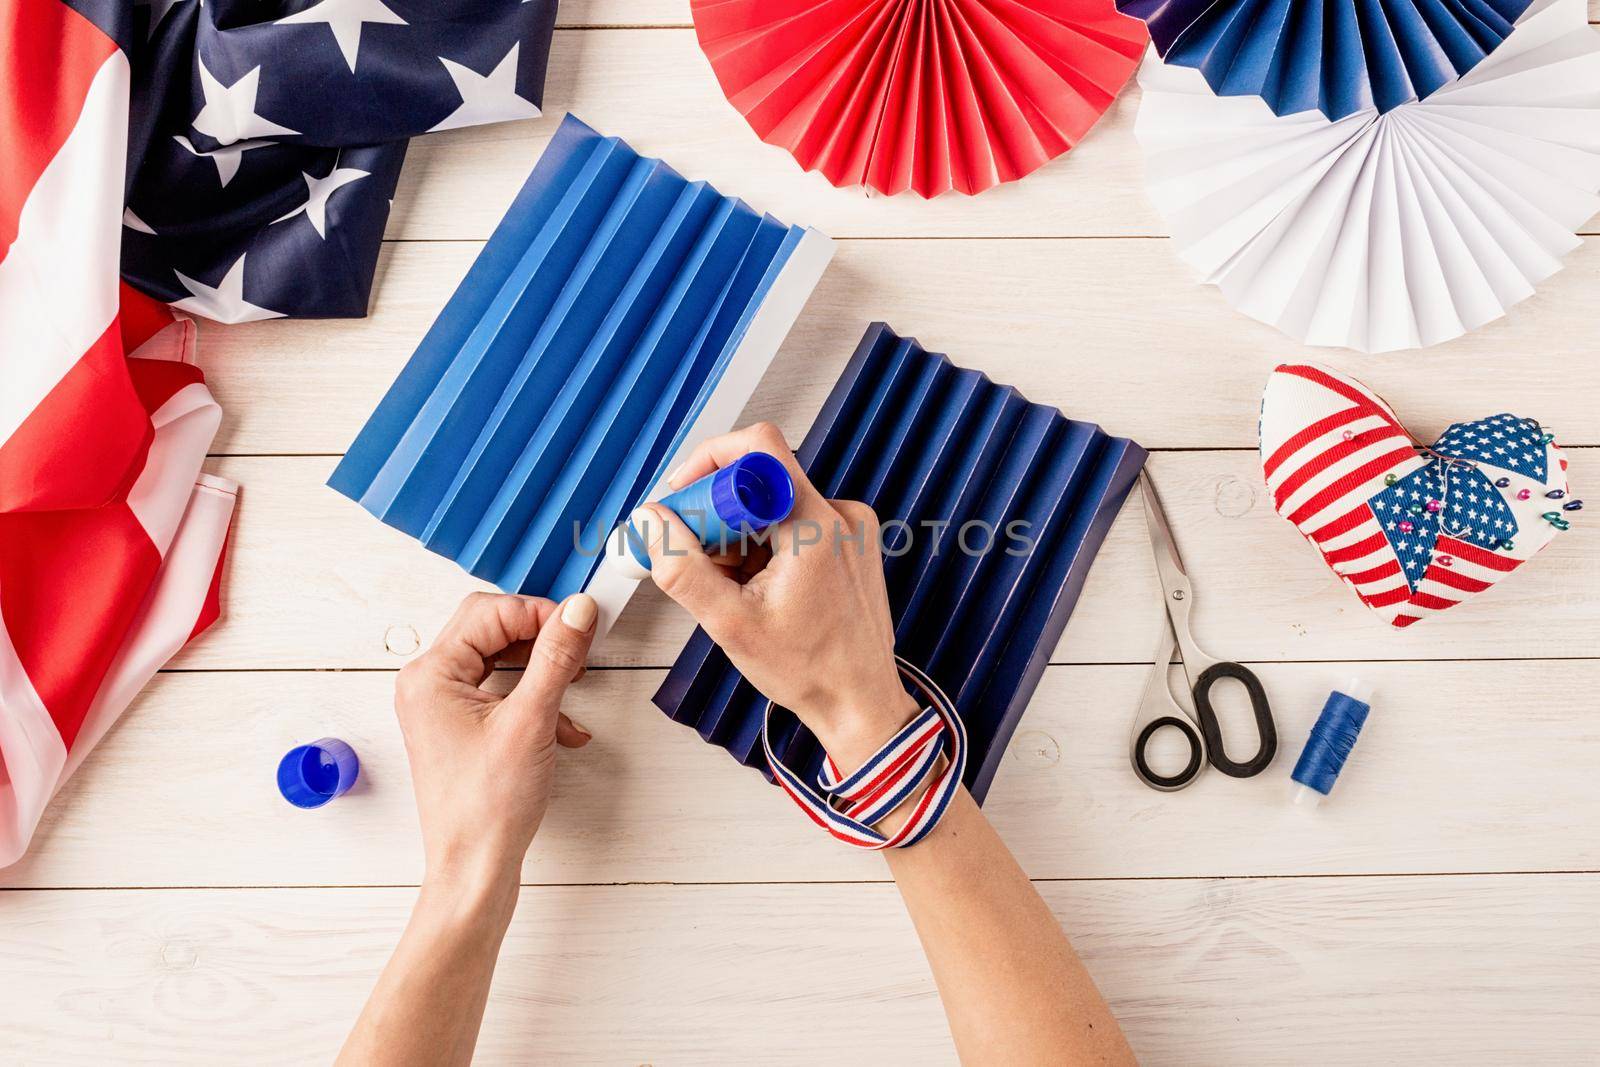 Gift idea, decor July 4, USA Independence Day. Step by step tutorial DIY craft. Making colorful paper fans, step 4 - gluing paper, stick together. Flat lay top view